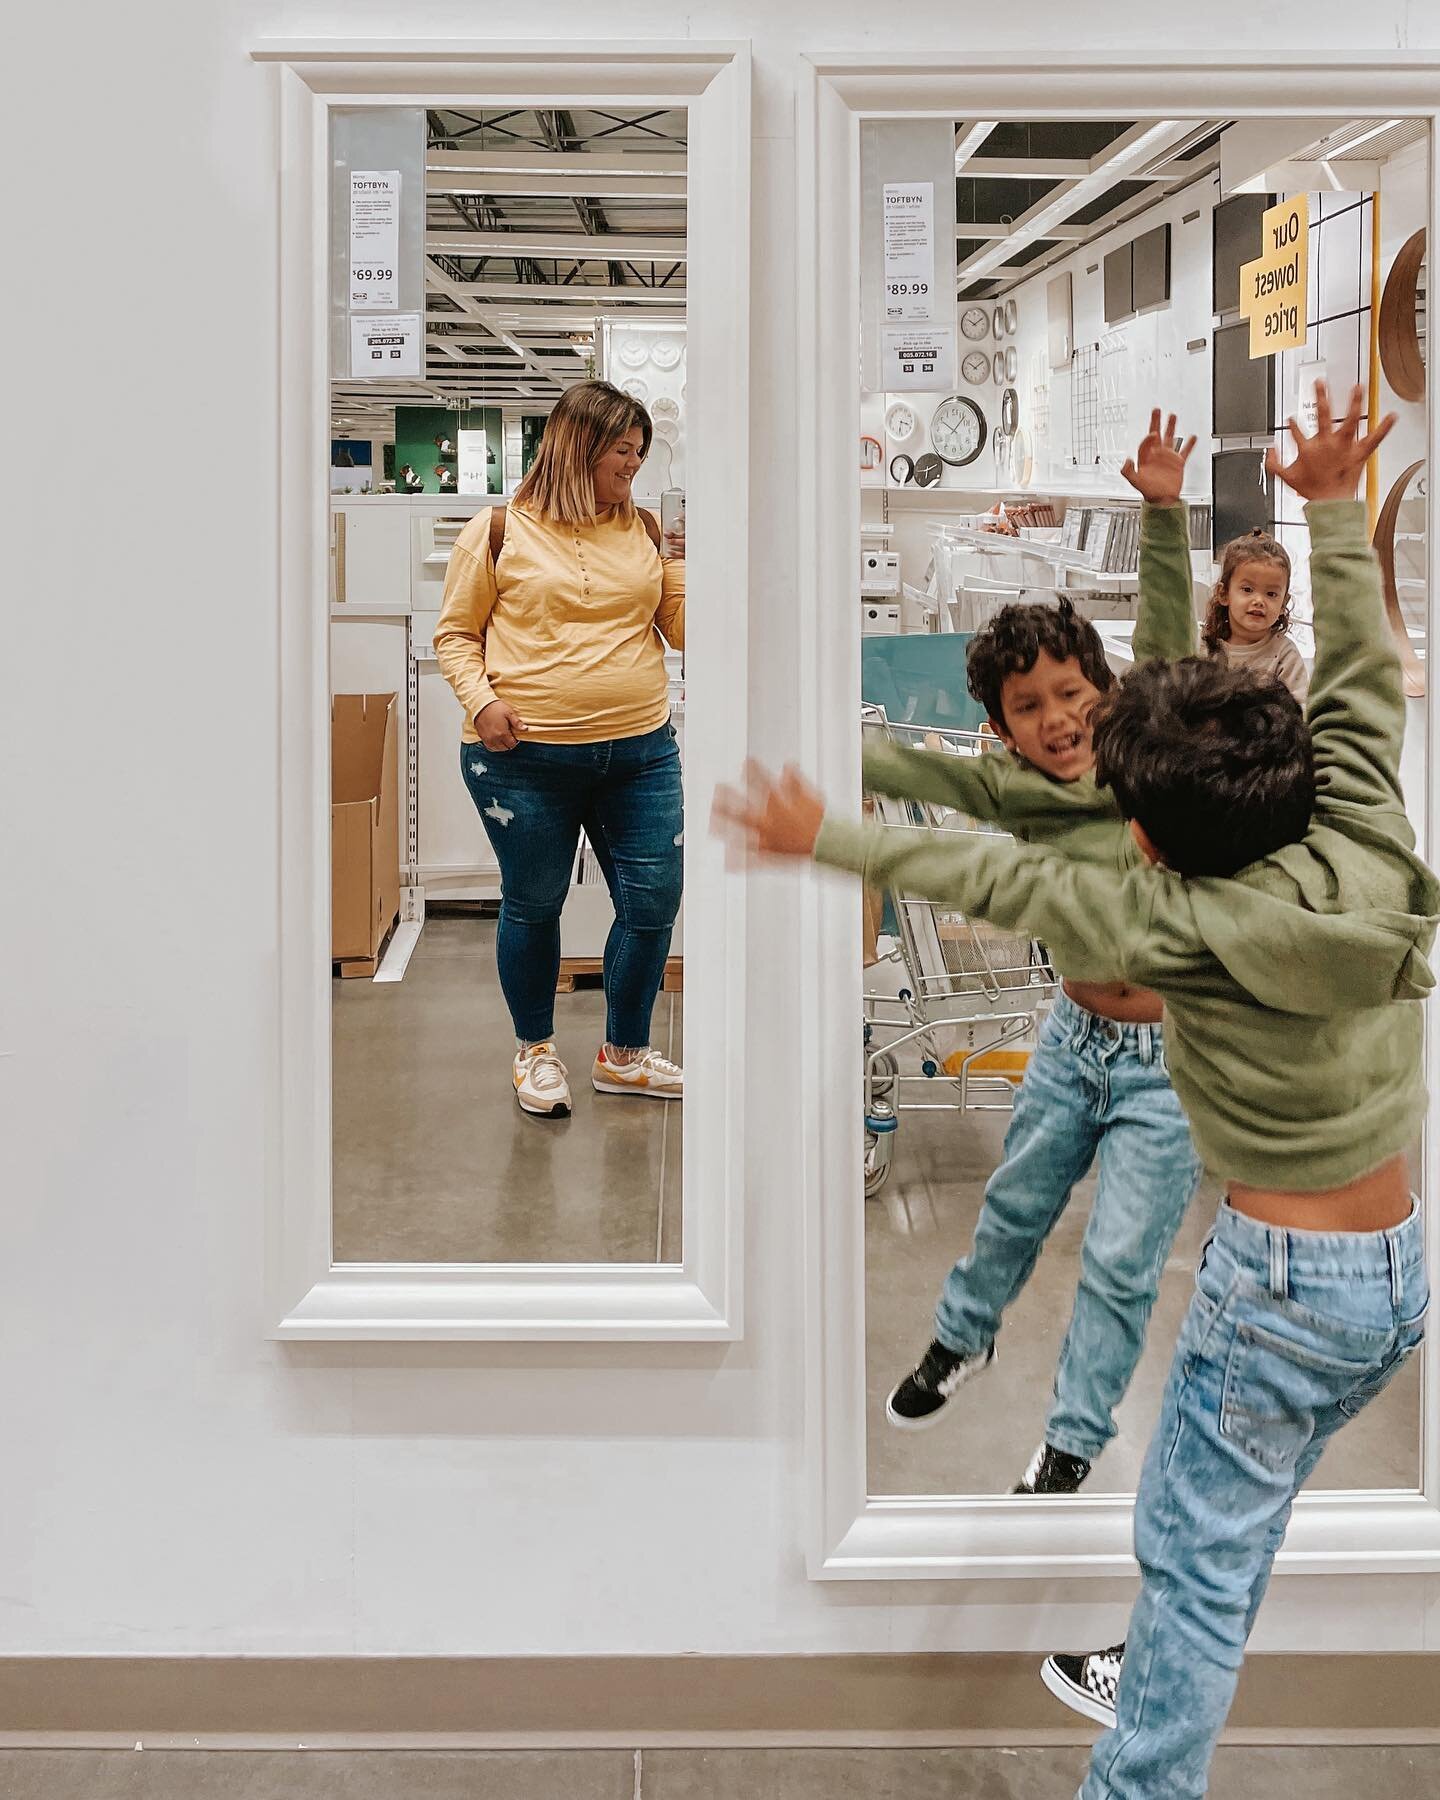 &ldquo;Mom&hellip; are we gonna take a picture by the mirror or what?&rdquo; - Jax

Train 👏🏽 up 👏🏽 a 👏🏽 child 👏🏽! 😆 Shopping with these two required extra patience today because they wanted to look at everything! Thank you @ikea for putting 